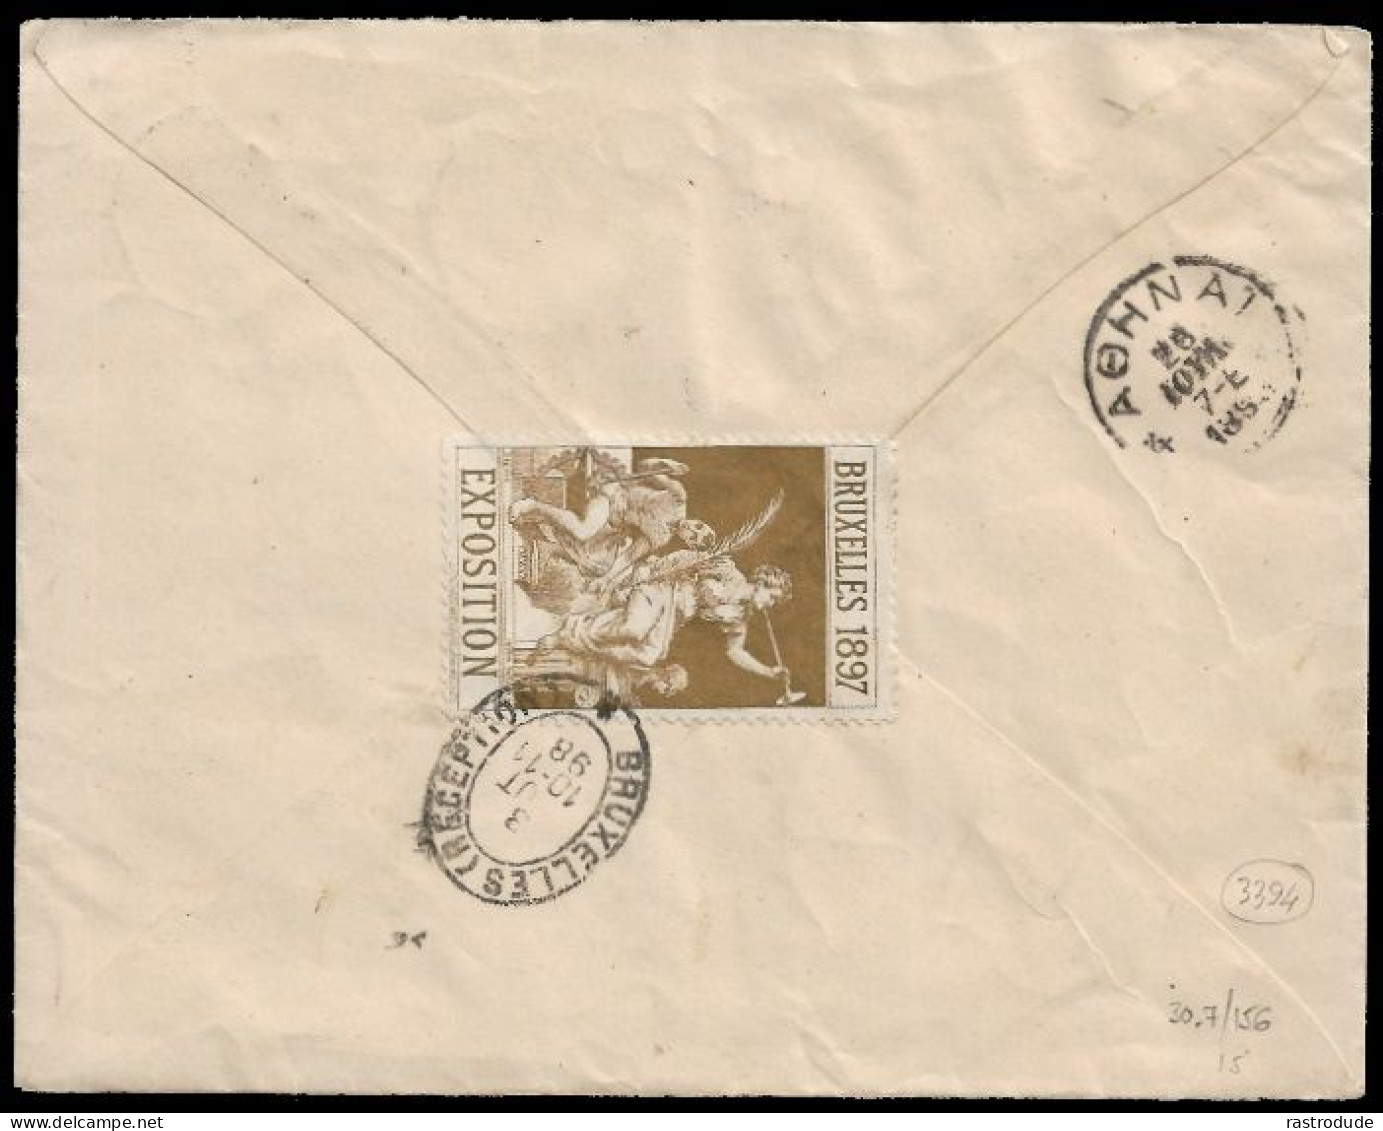 1898 BELGIUM 10C UPRATED REGISTERED POSTAL STATIONERY ENVELOPE EXPOSITION BRUXELLES 1897 TO GREECE - Buste